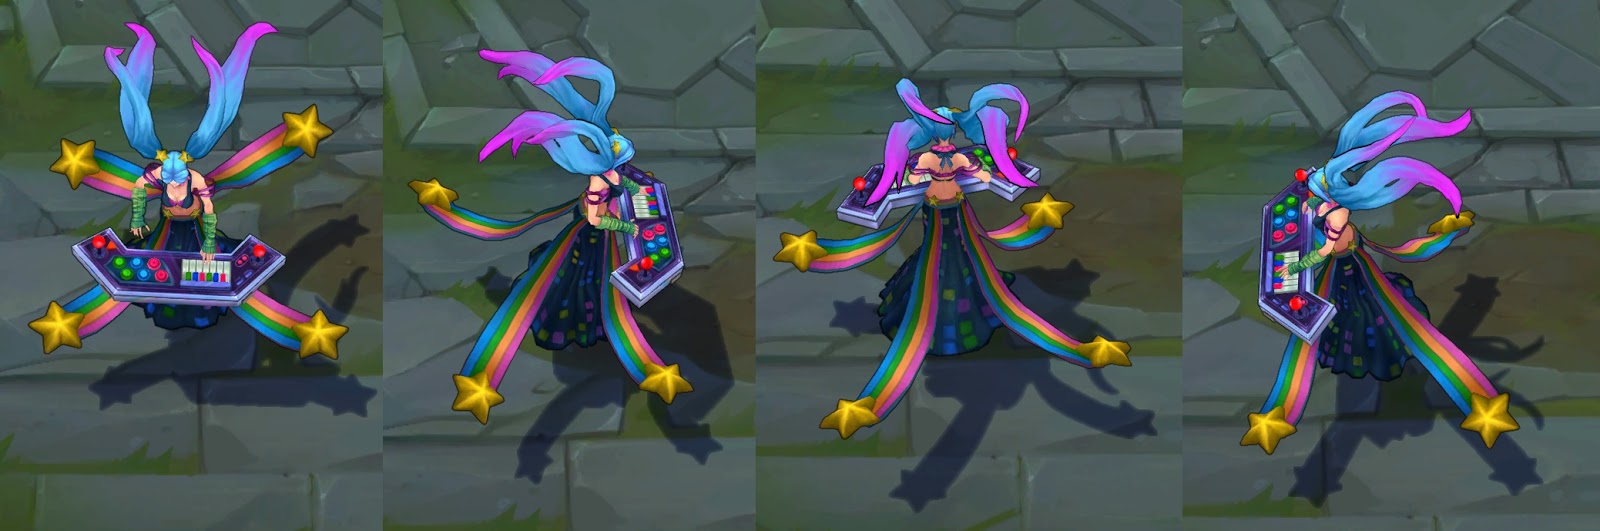 Surrender At 7 18 Pbe Update Guqin And Arcade Sona Updates New Sona Ult Vfx Lots Of Balance Changes And More